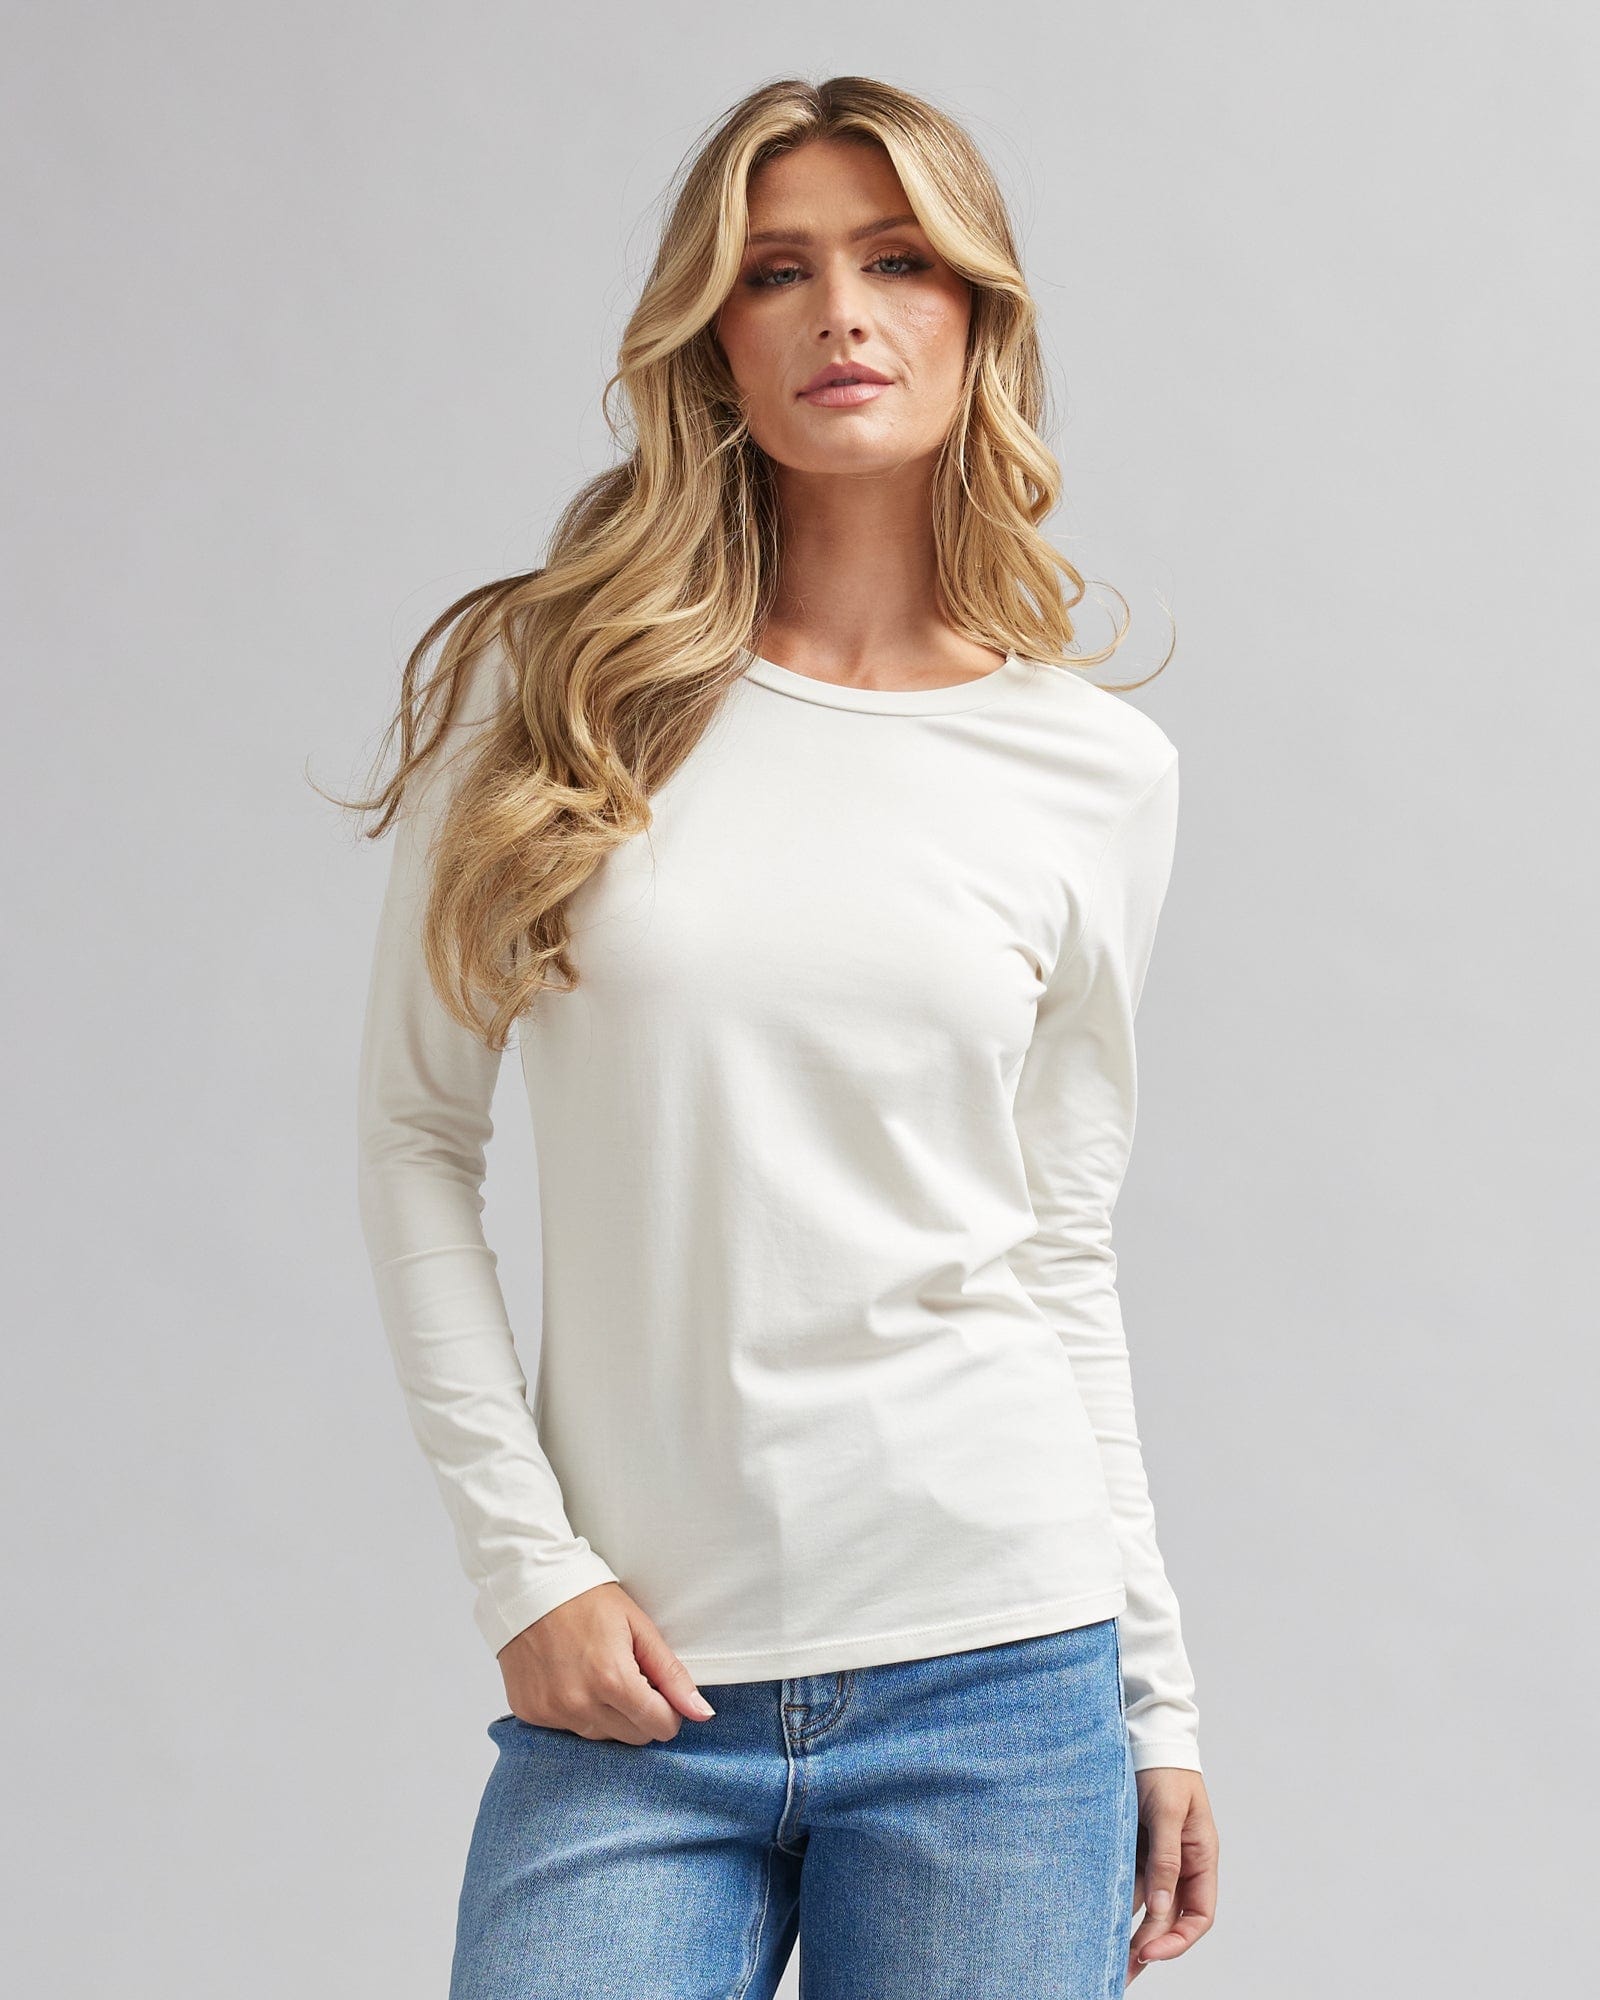 Woman in a long sleeve, semi-fitted, basic t-shirt